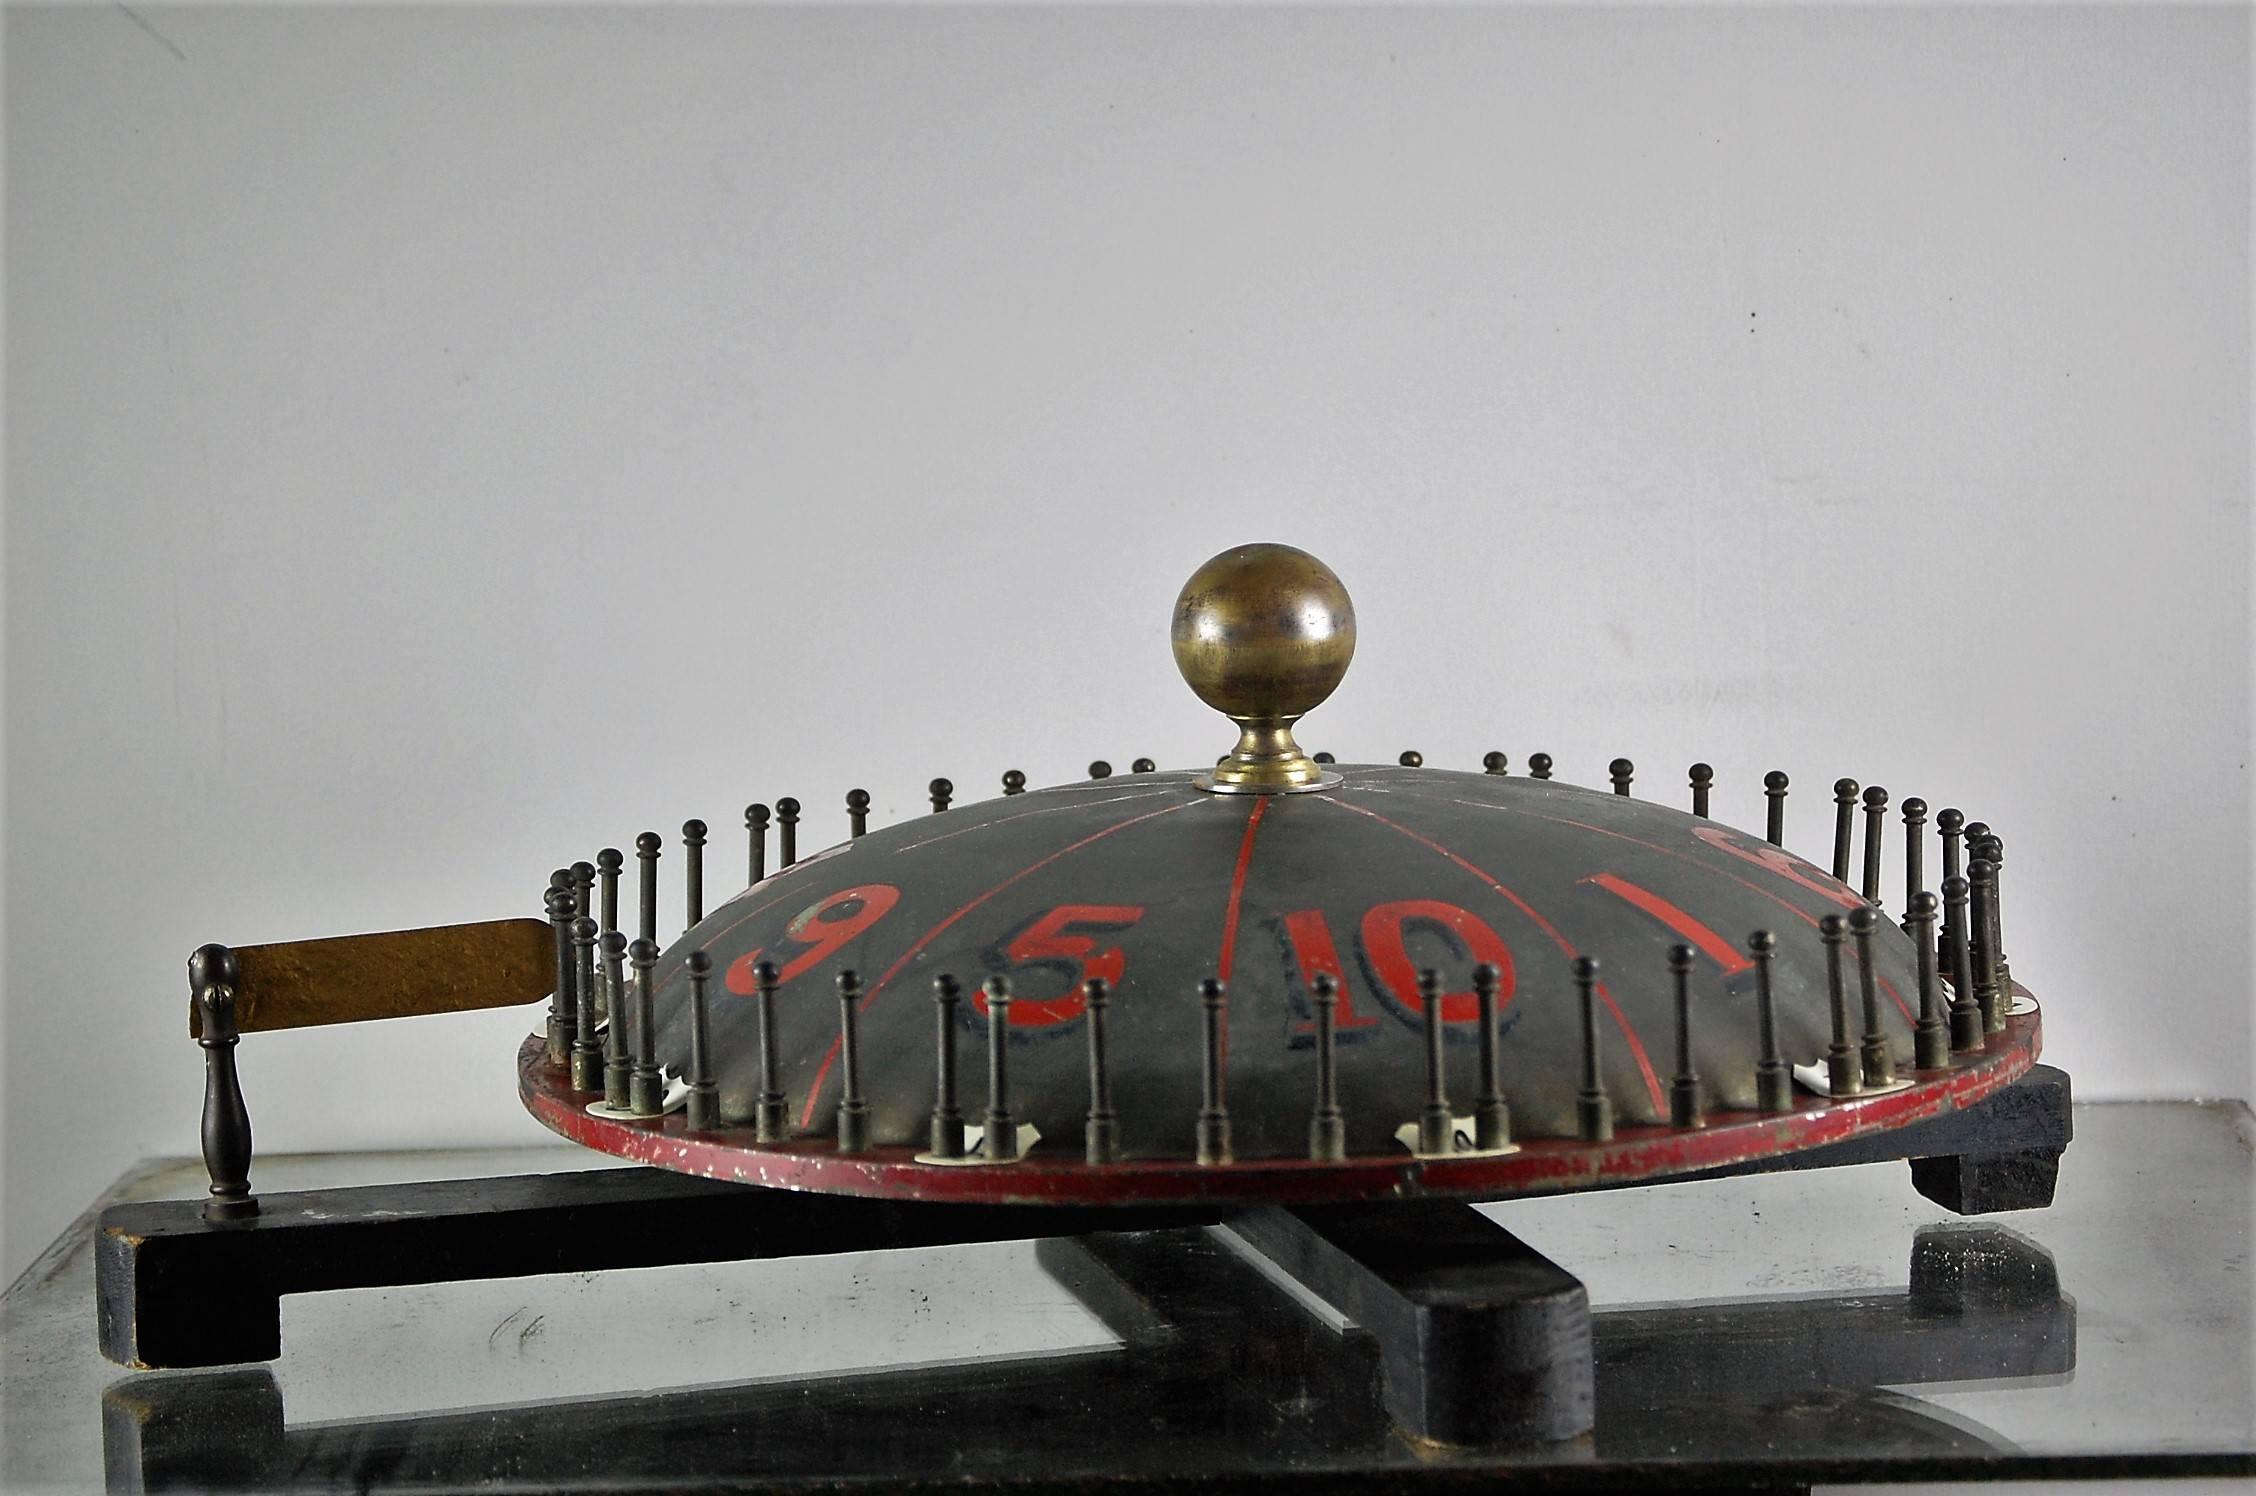 Late 19th century roulette or game of chance spinning wheel, unusual convex shape, hand-painted numerals, great patination, still spin enthusiastically!